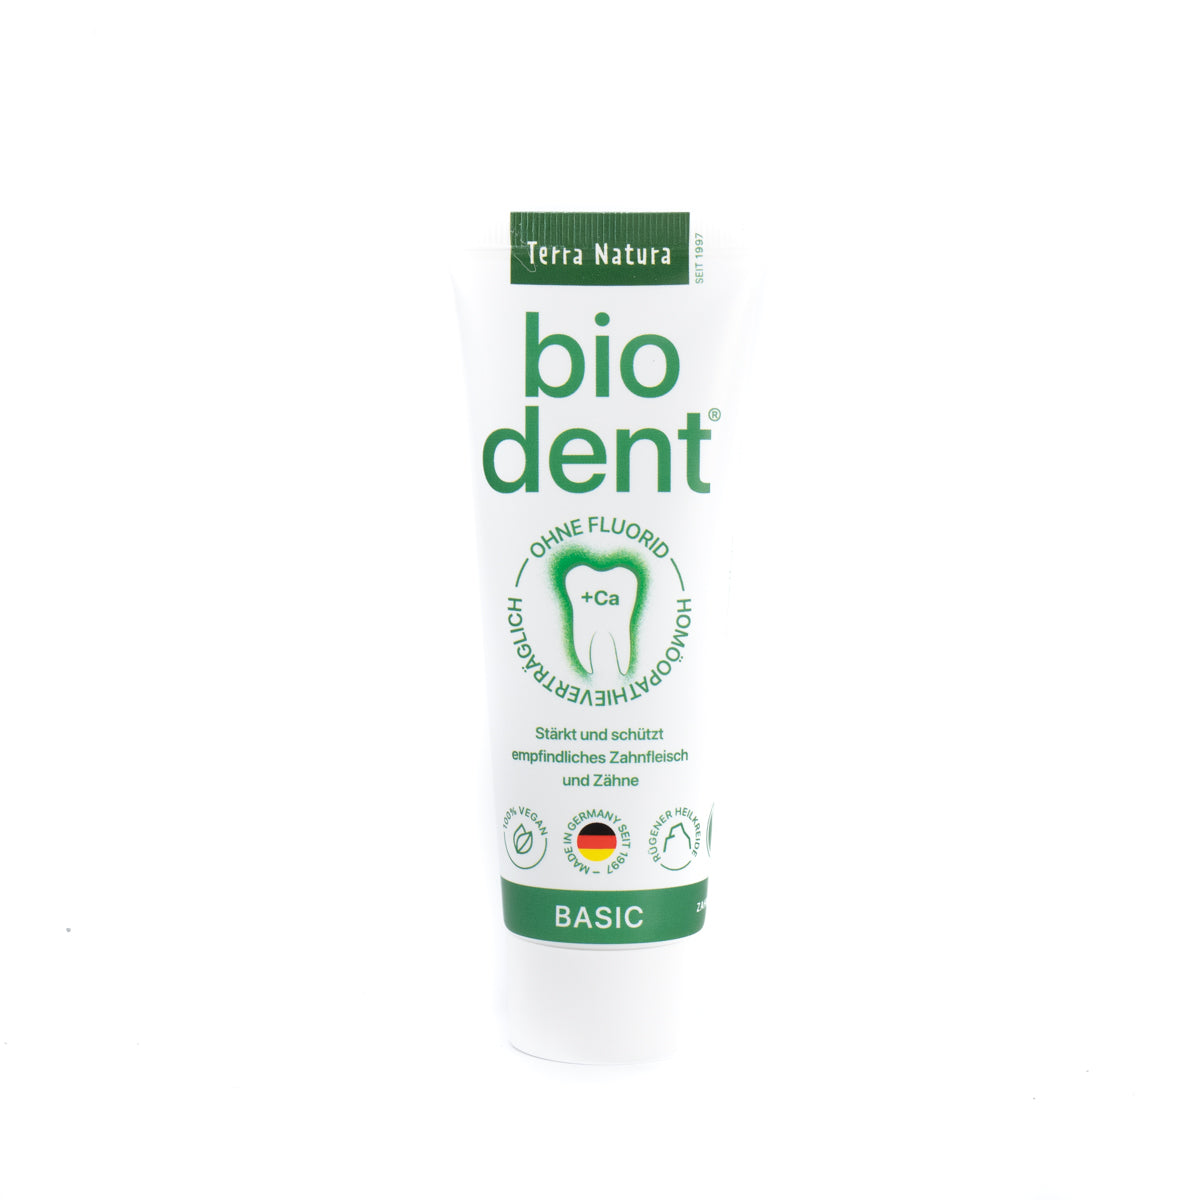 Organic mint toothpaste, sugar-free with stevia